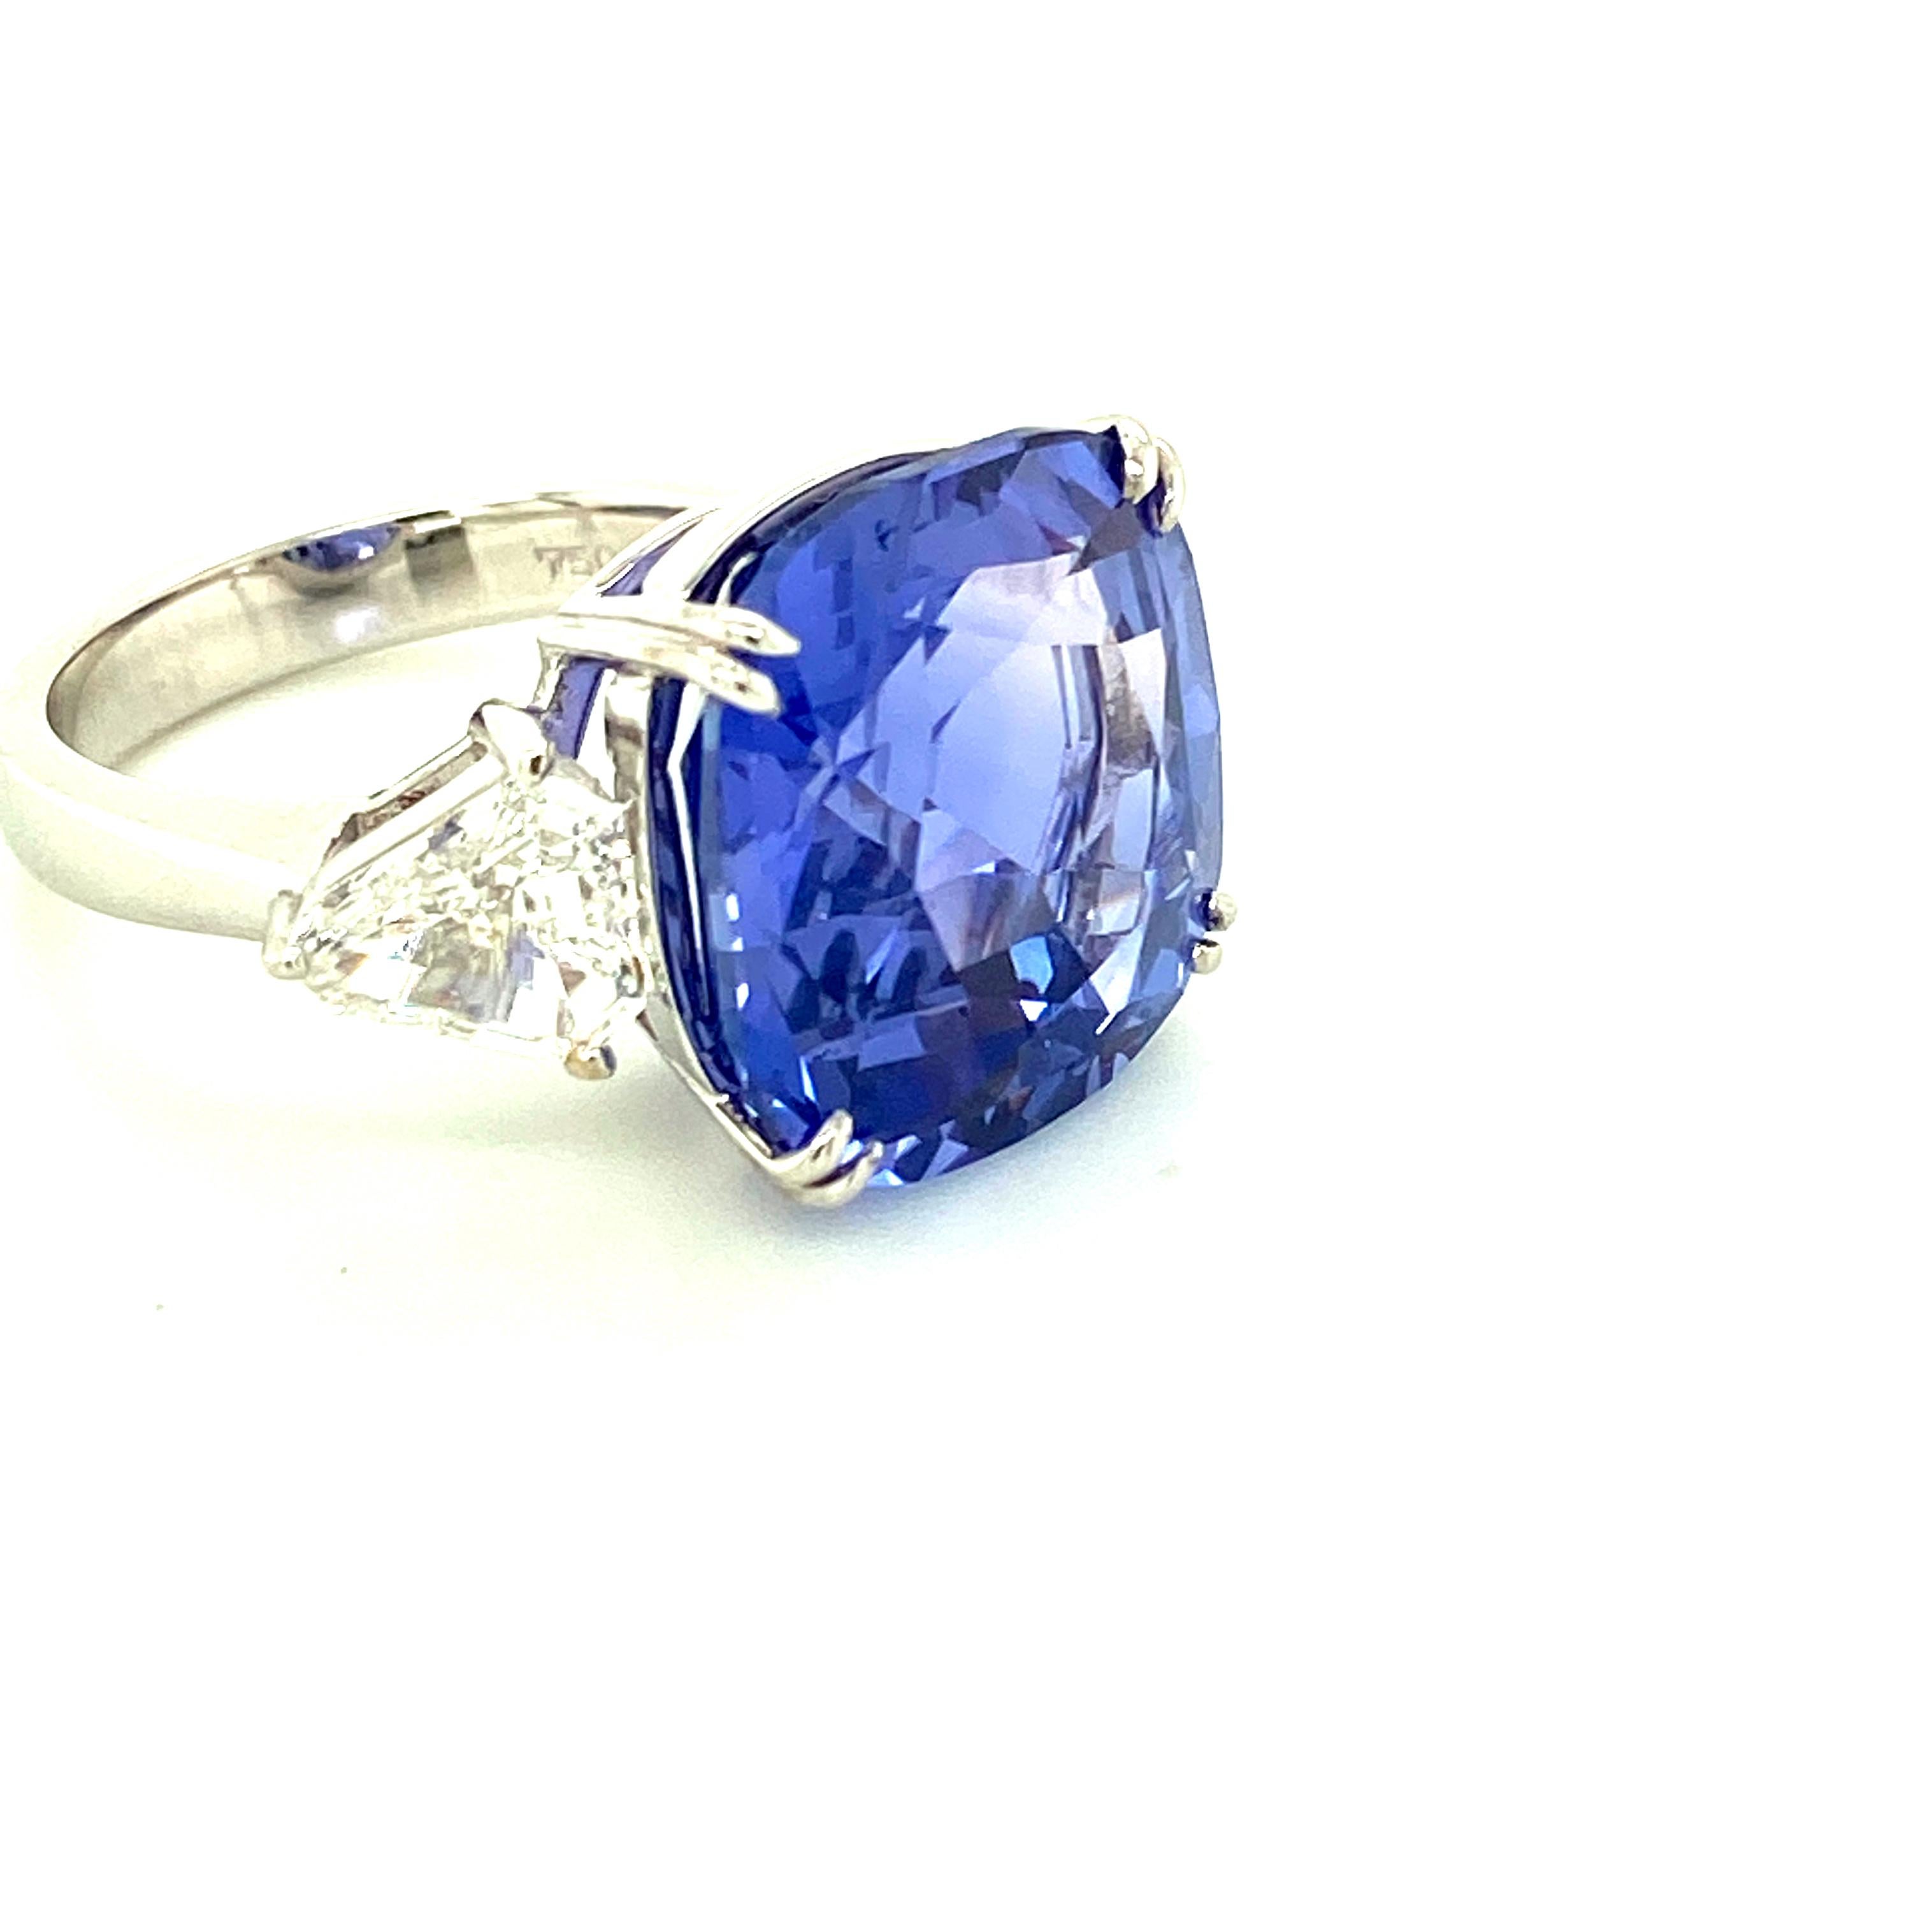 15.97 Carat GRS Certified No Heat Color Change Sapphire And Diamond Ring:

A magnificent ring, it features a huge 15.97 carat GRS certified unheated (no heat) color-change sapphire accented by two kite-cut white diamonds to form a beautiful